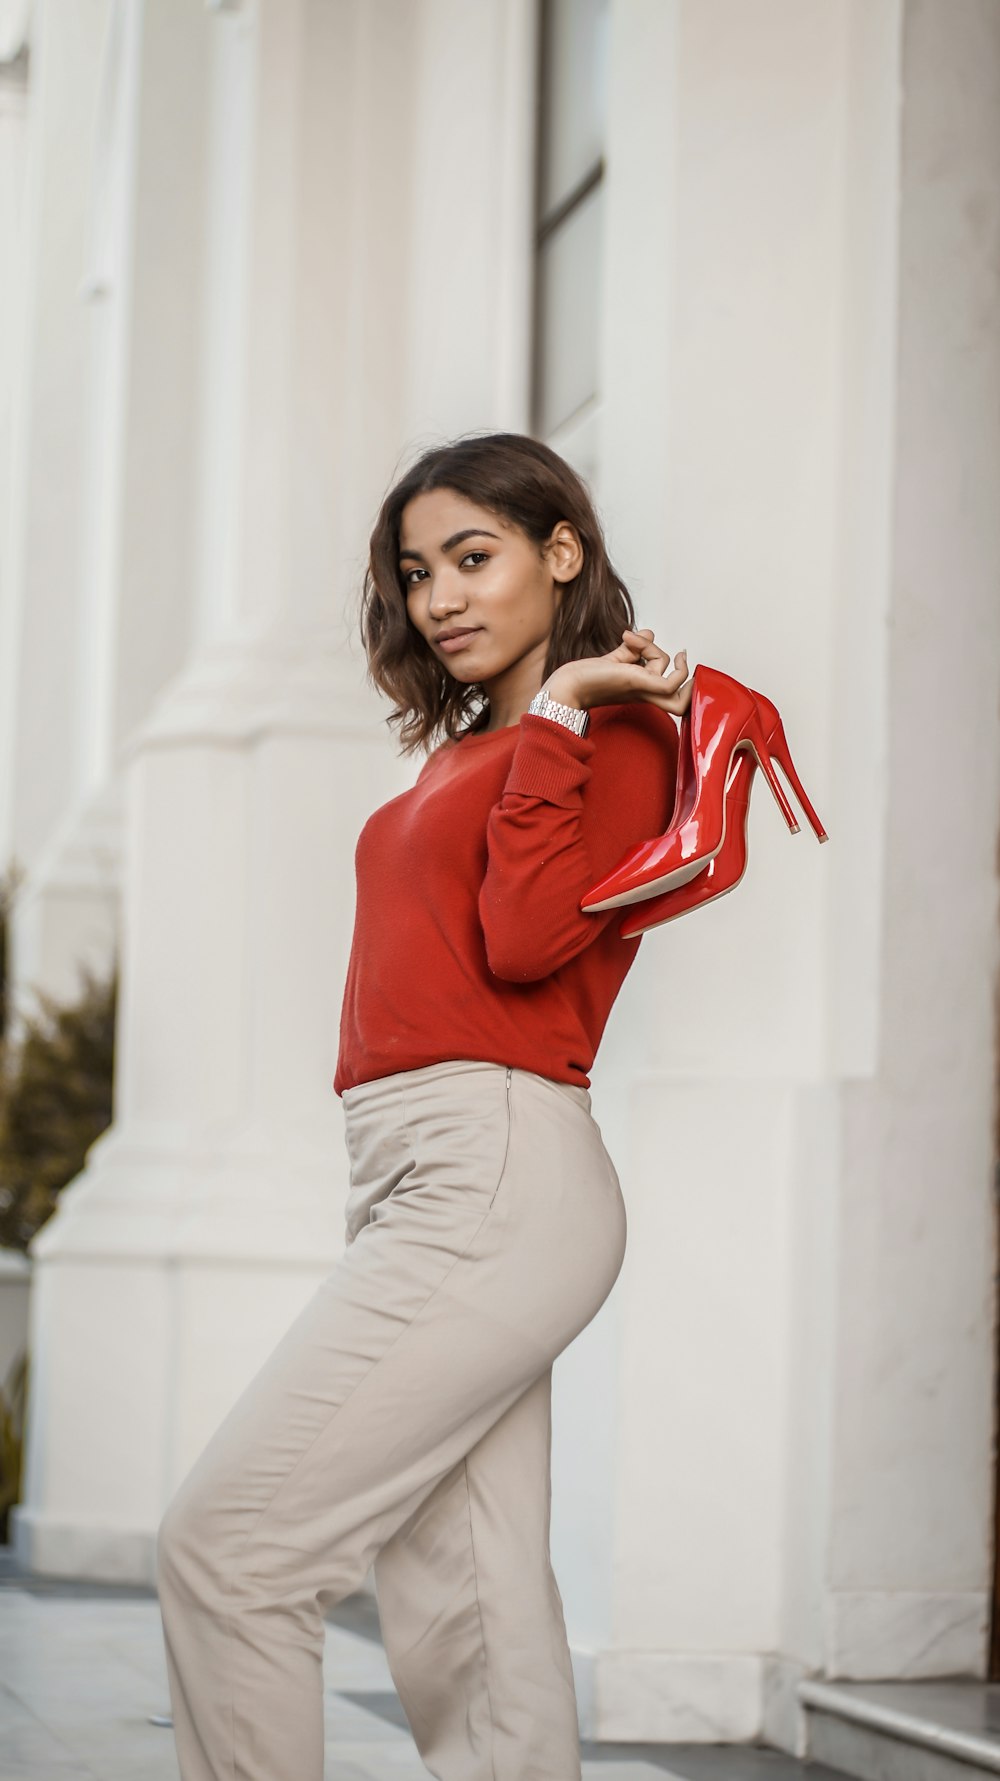 woman in red long sleeve shirt and white pants holding red leather handbag